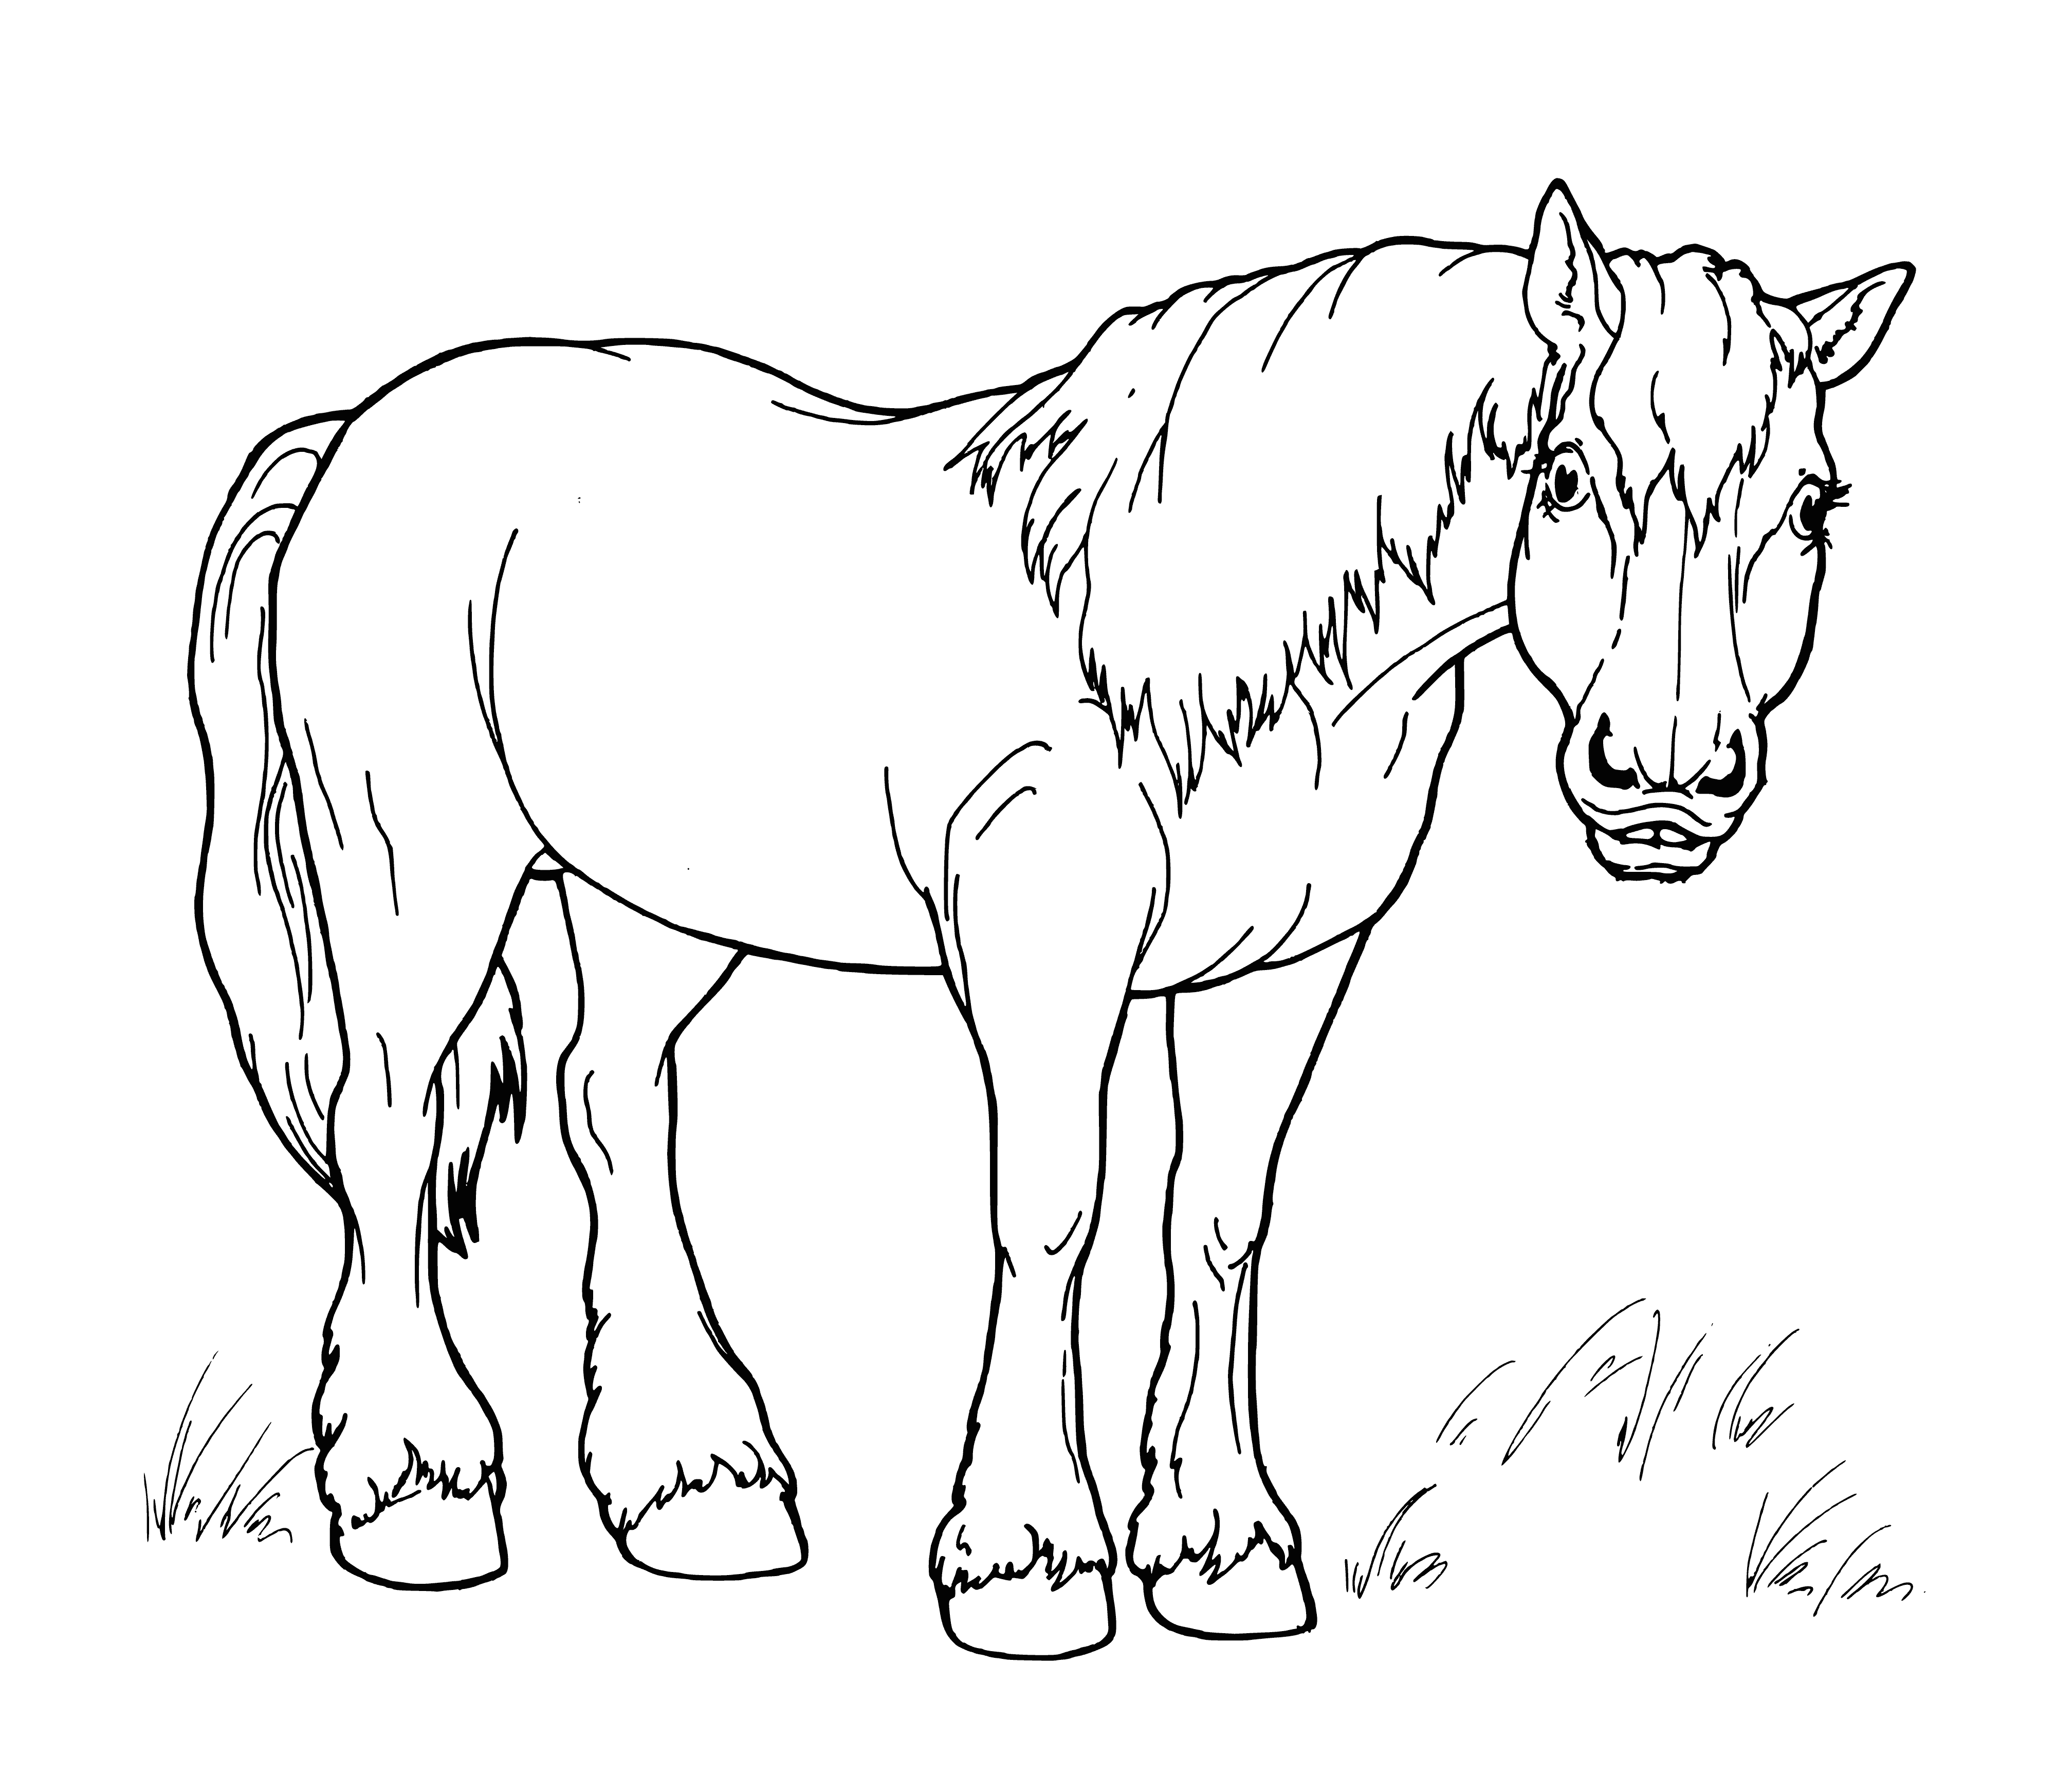 coloring page: Horses are four-legged mammals w/ long neck & tail, used for transportation & recreation & associated with freedom & power.